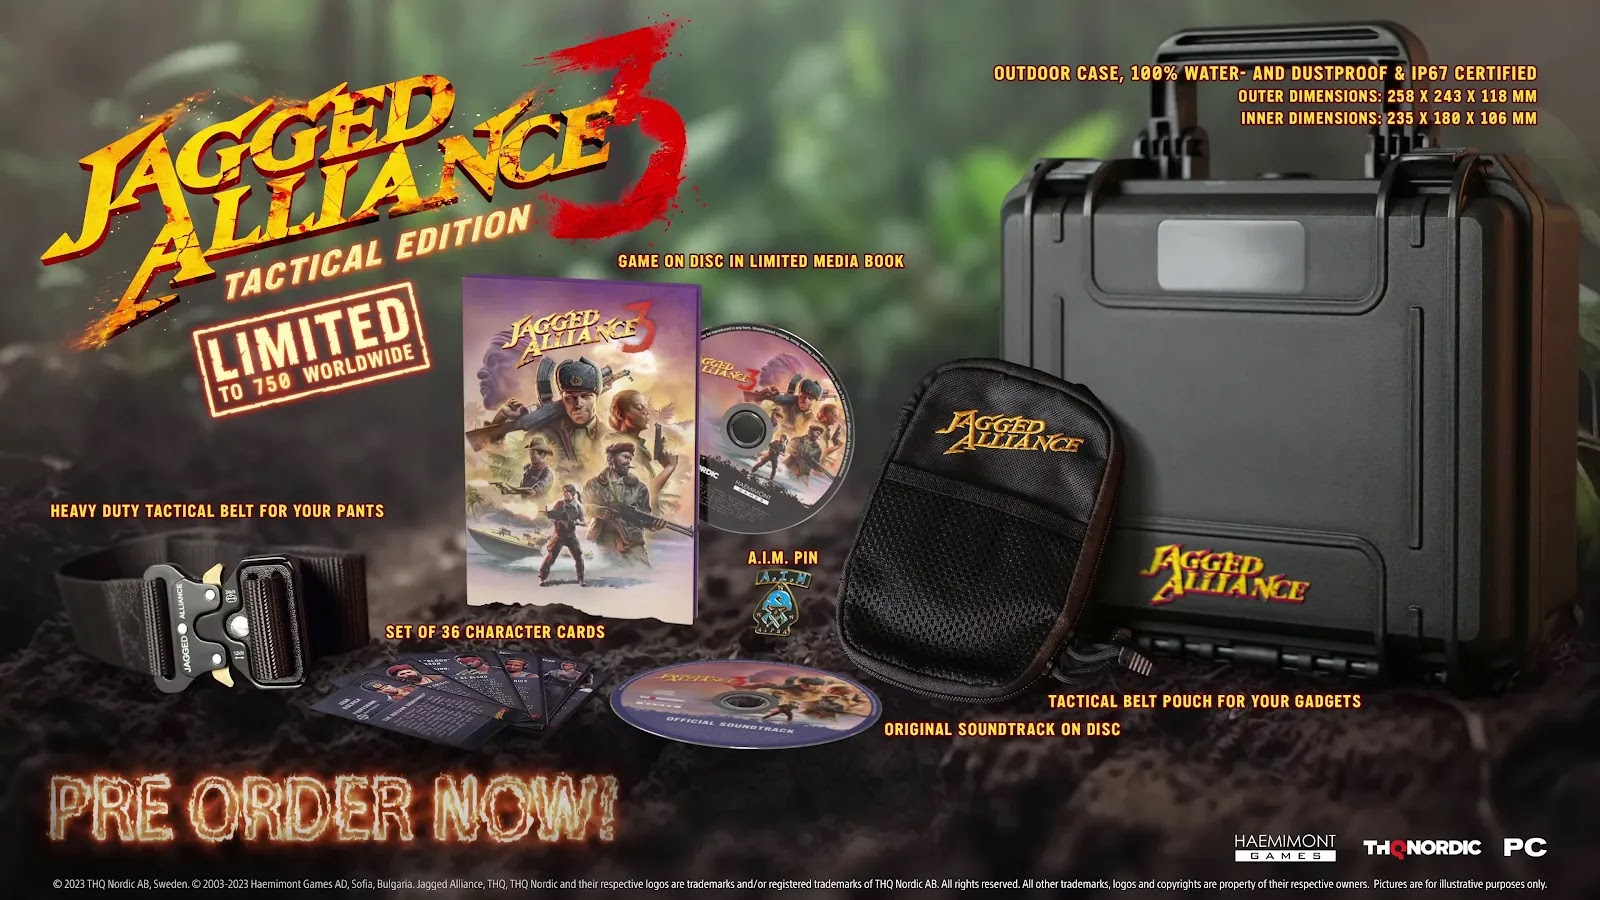 Jagged Alliance 3 Set to Launch This Summer with Physical Tactical Edition